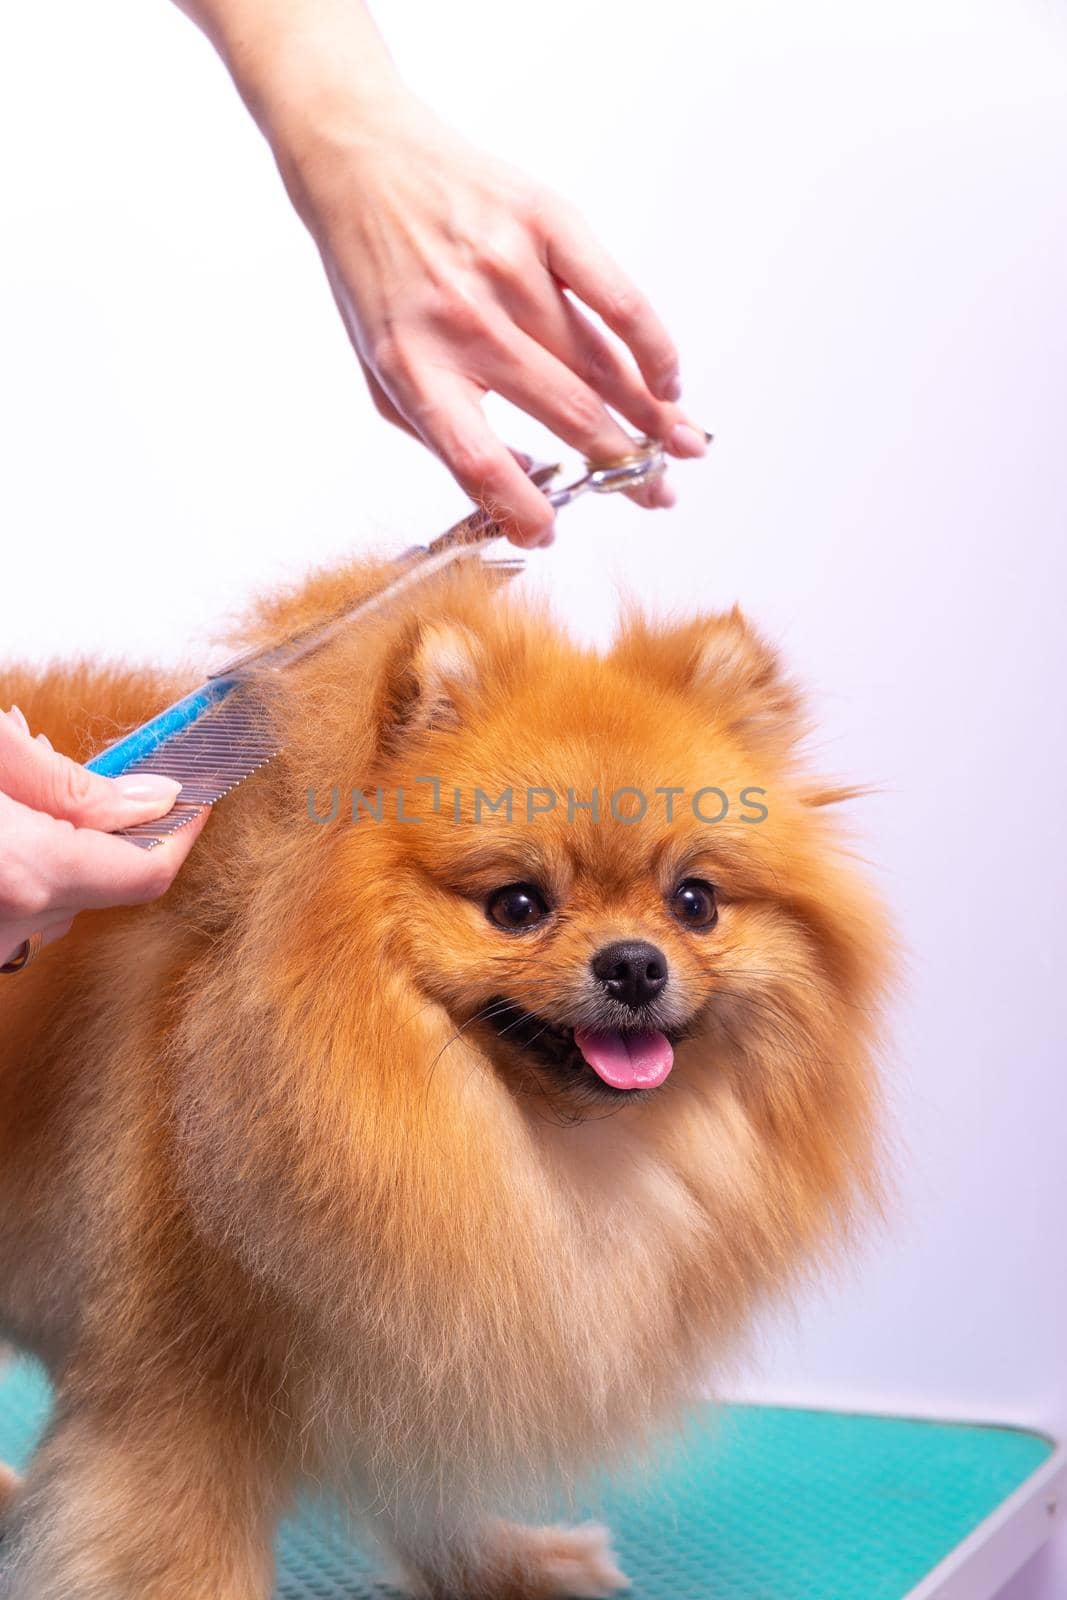 Professional groomer takes care of Orange Pomeranian Spitz in animal beauty salon. Grooming salon worker cuts hair on dog back in close up. Specialist works with curved scissors and brush.